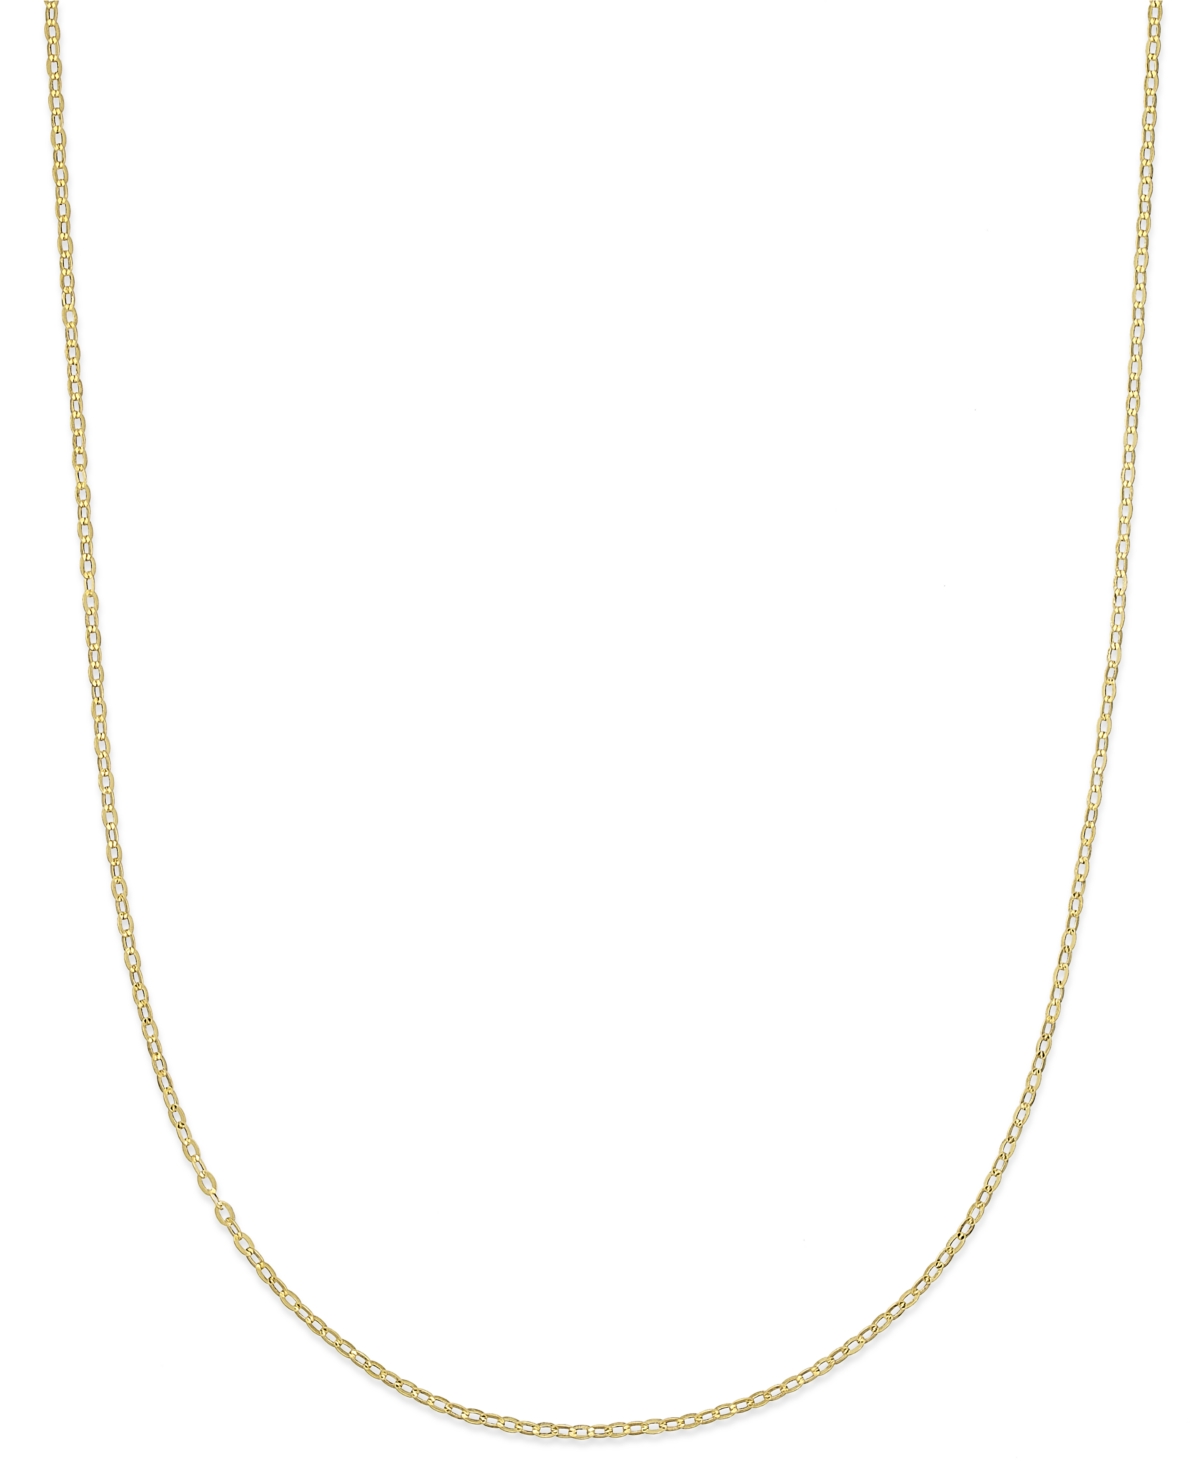 Italian Gold 16" Flat Rolo Chain Necklace (1-3/8mm) in 14k Gold